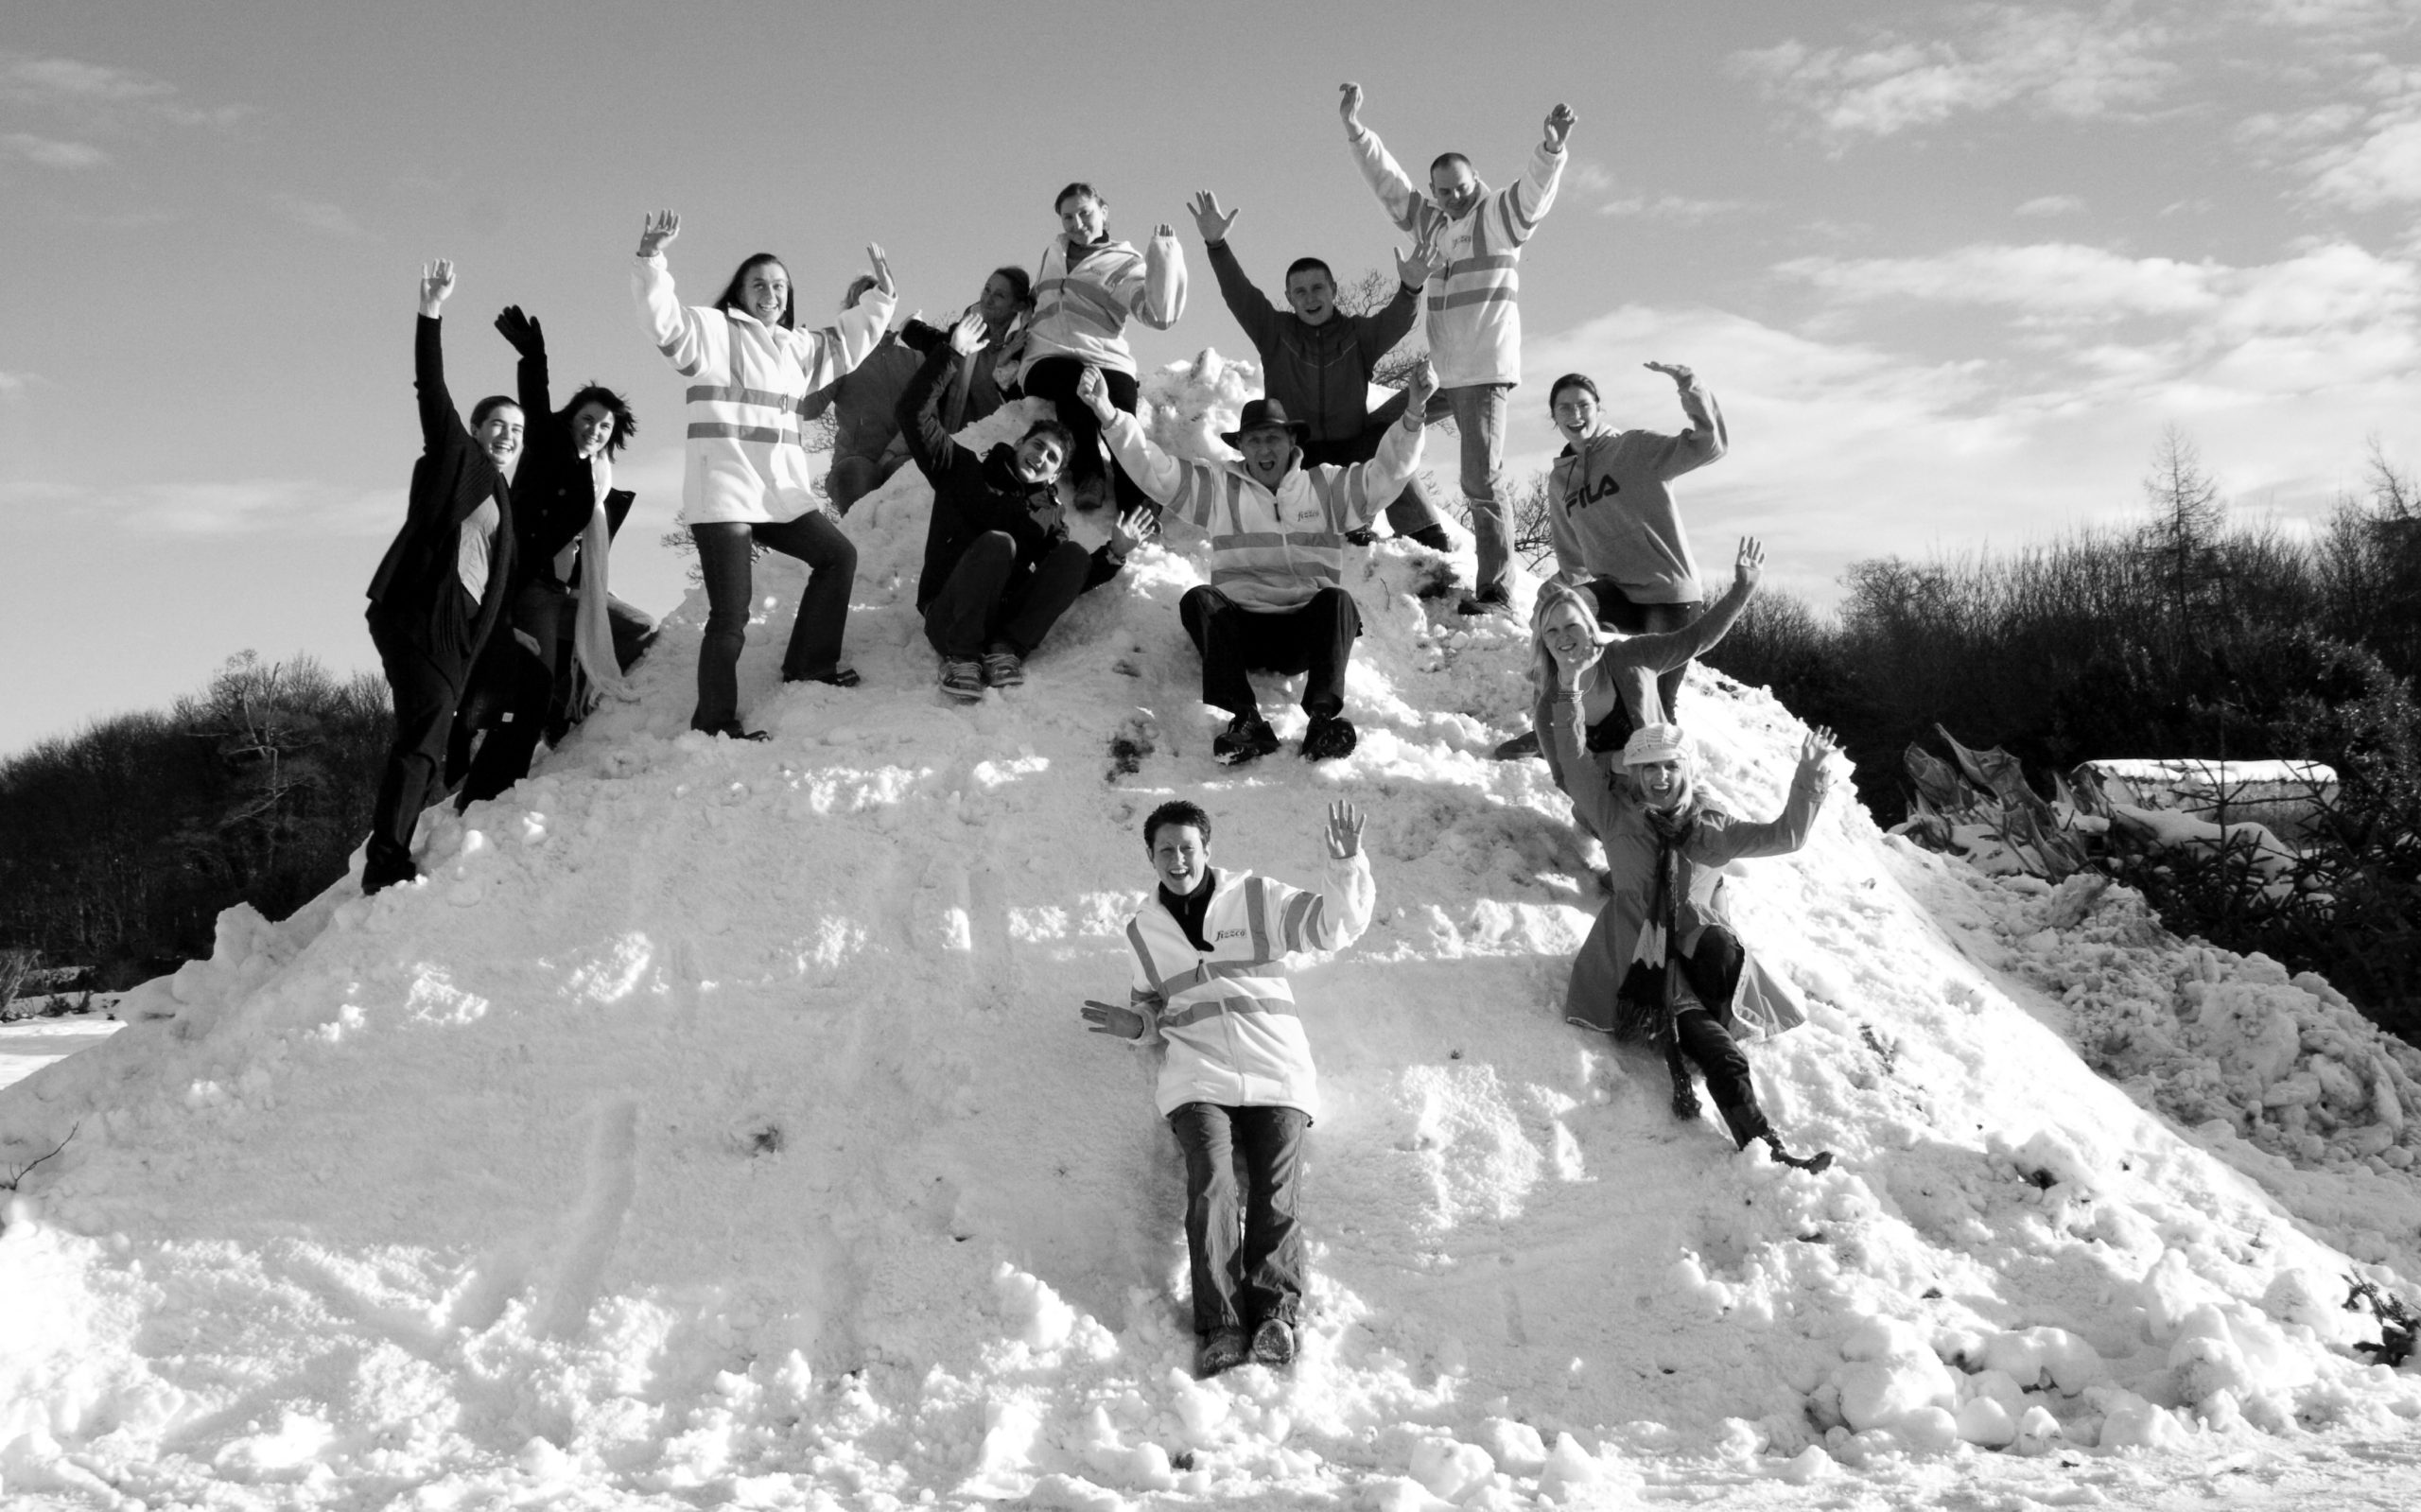 Black and white image of Fizzco staff members cheering on a hill covered in snow.